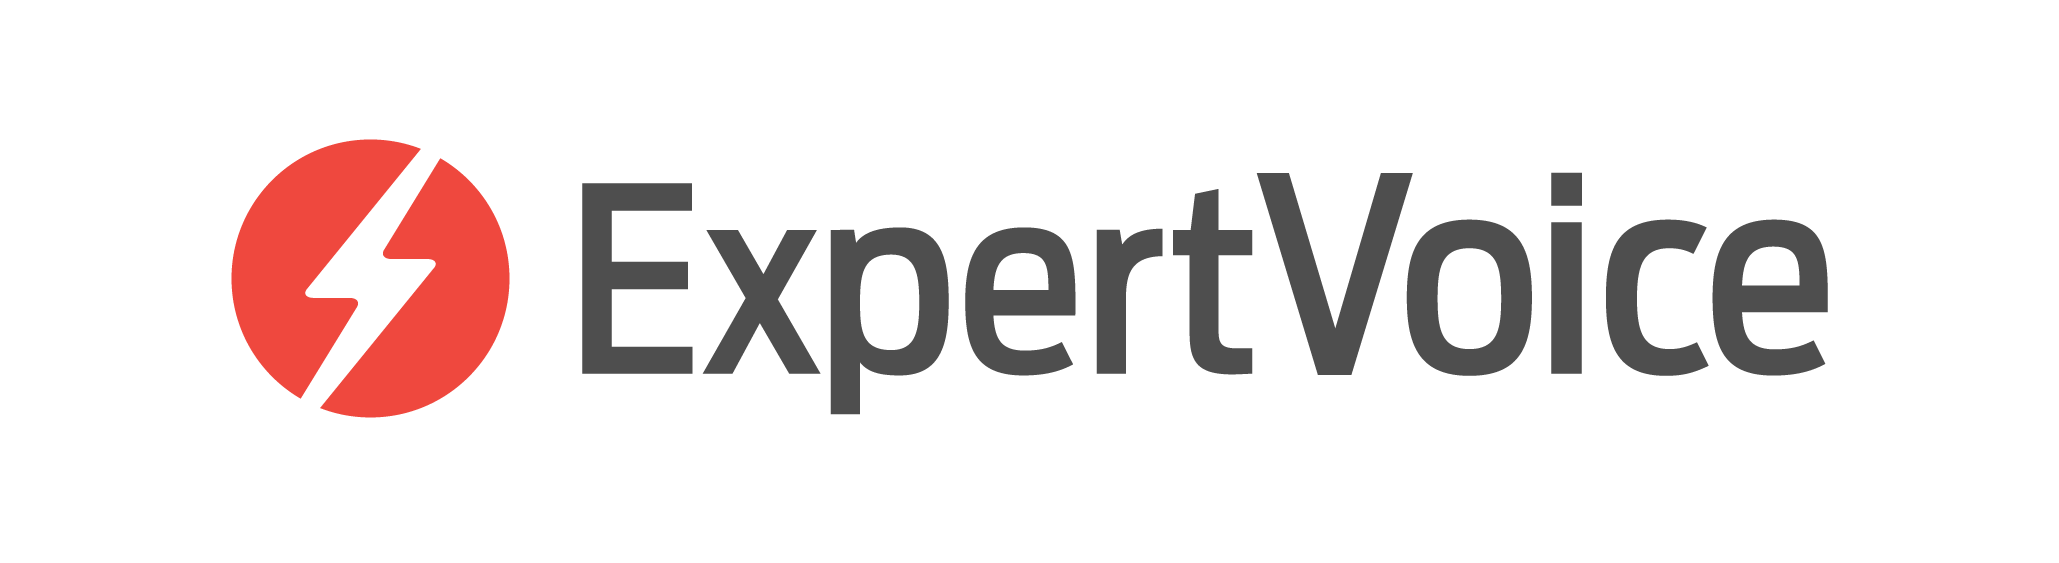 ExpertVoice logo - red circle with lightning bolt